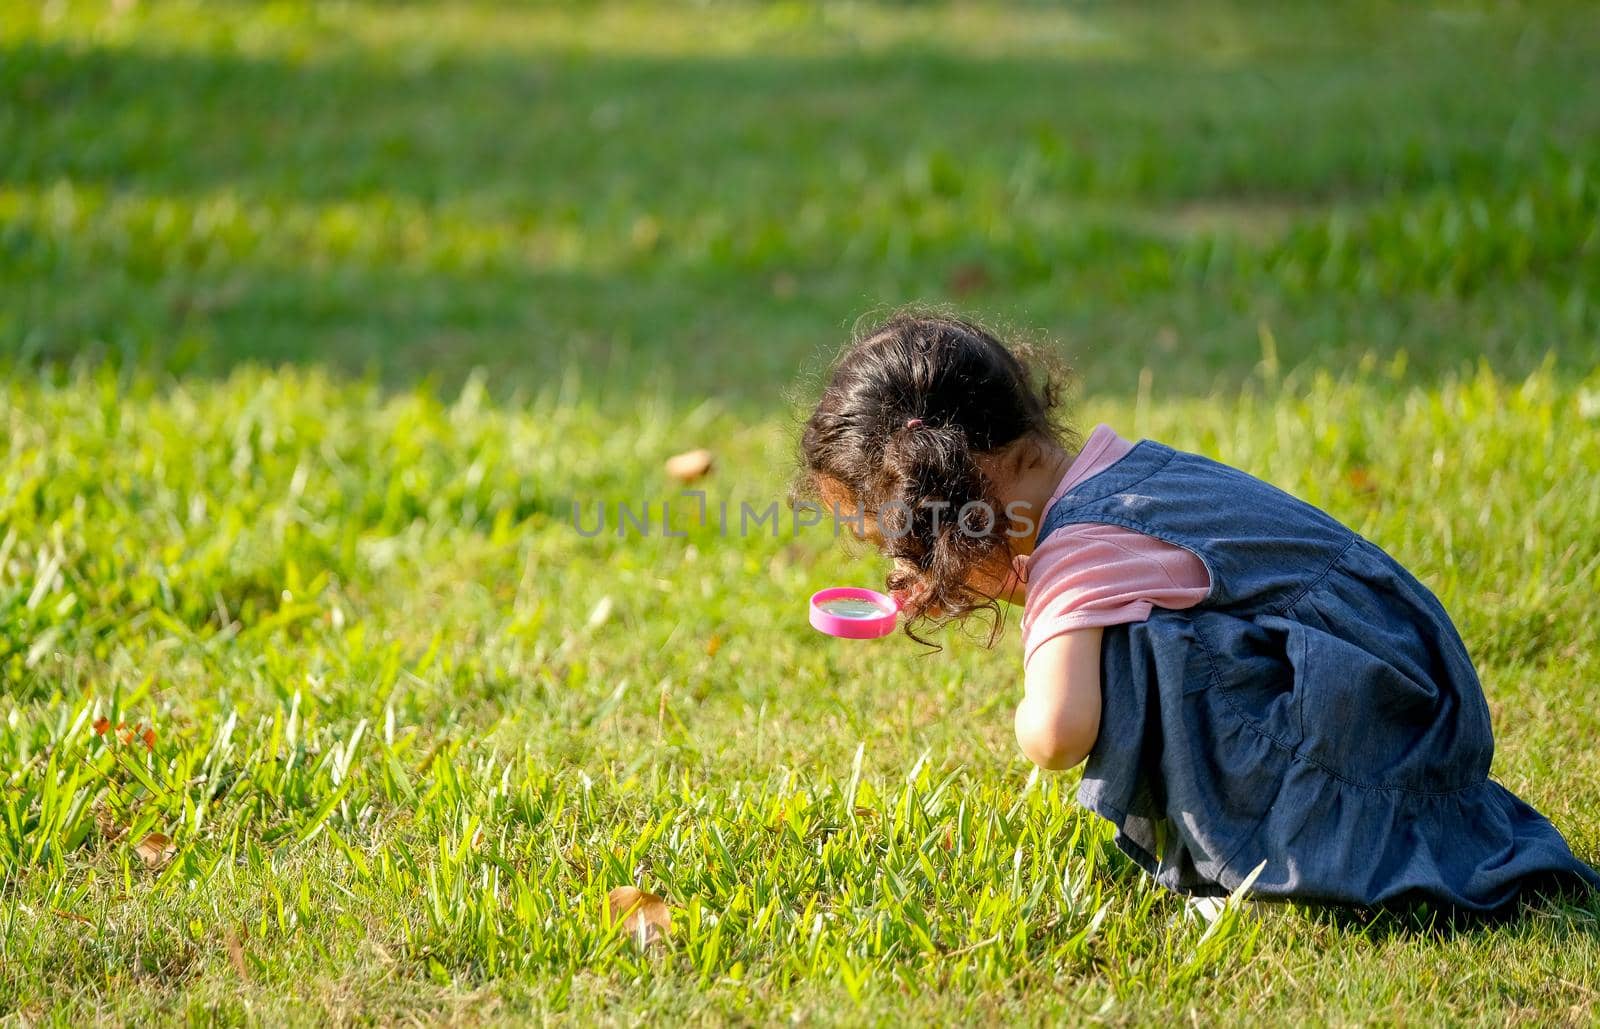 Little girl enjoy with using magnifier glass to look for something inside grasses in green garden with morning light.